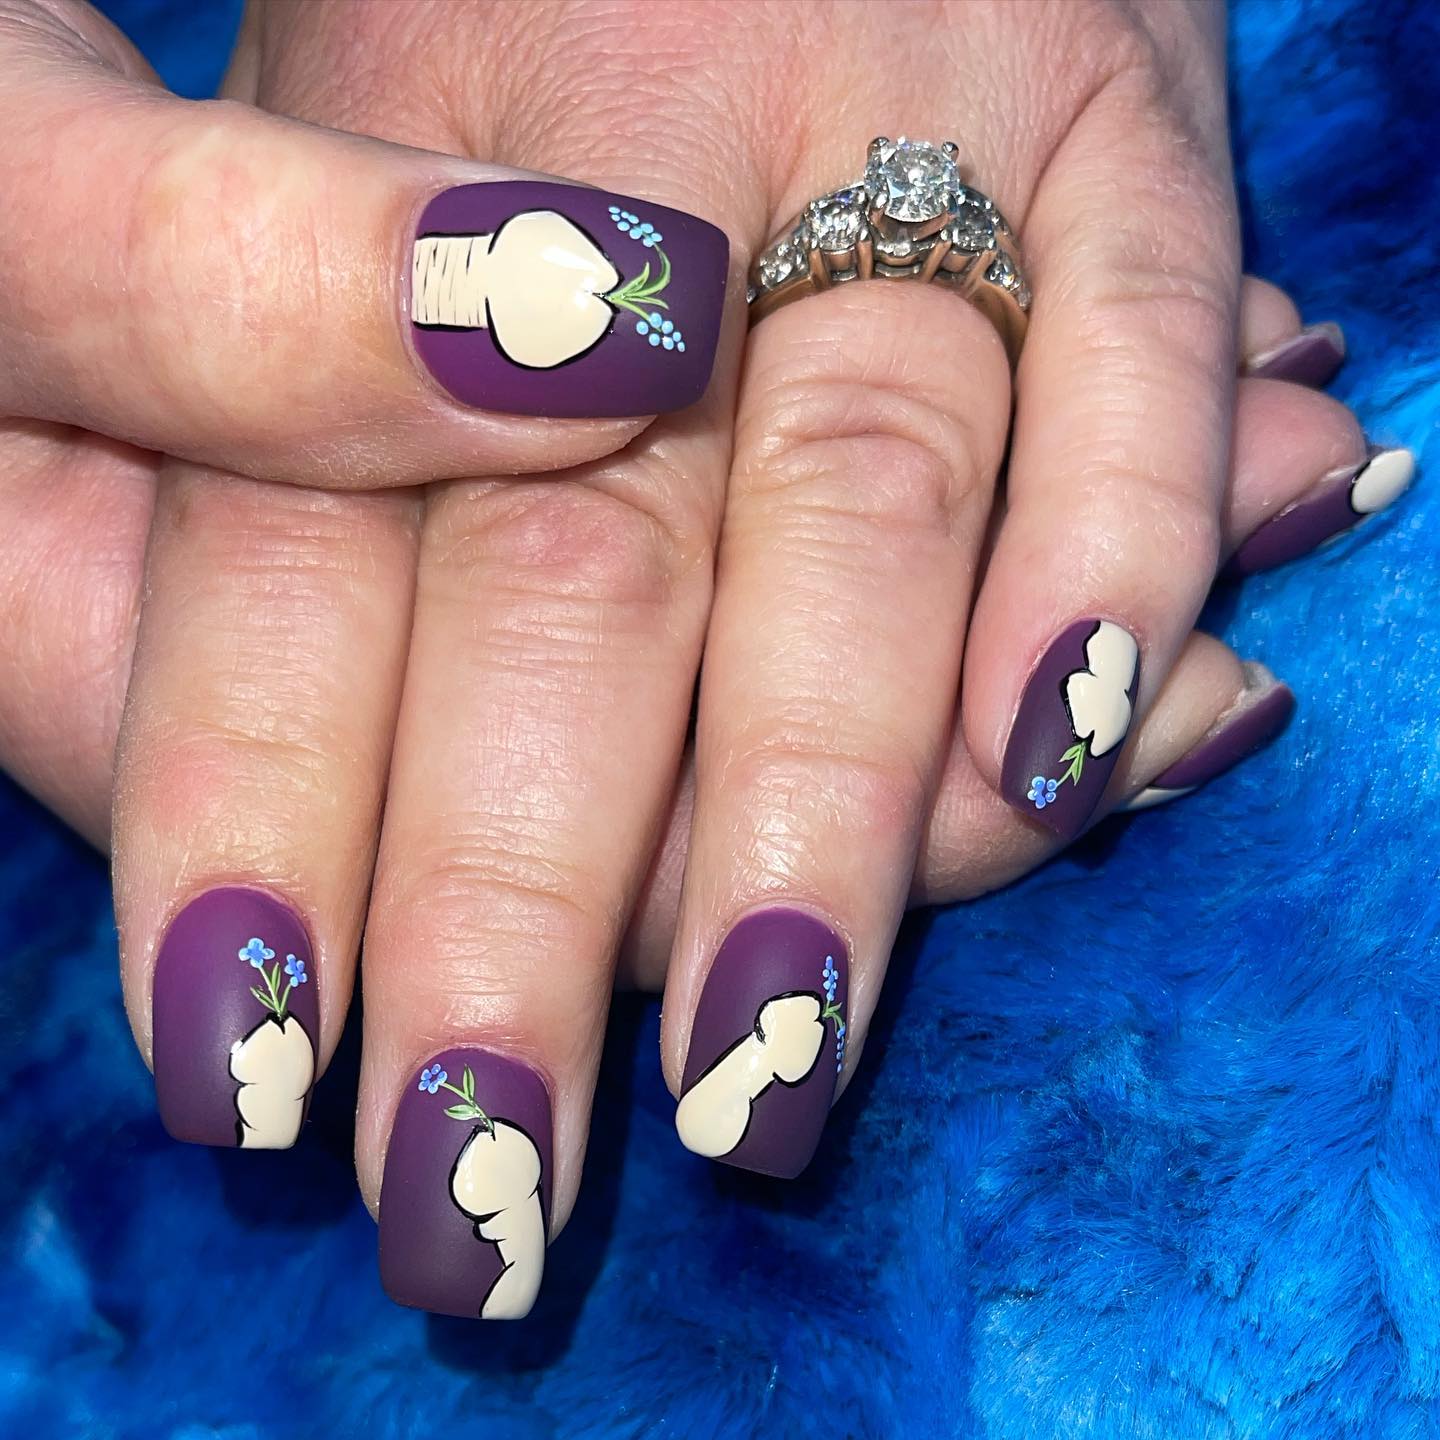 To make a penis nail art stand out, you need to use darker colors like this damson above. Plus, the penises spouting flowers are cute.